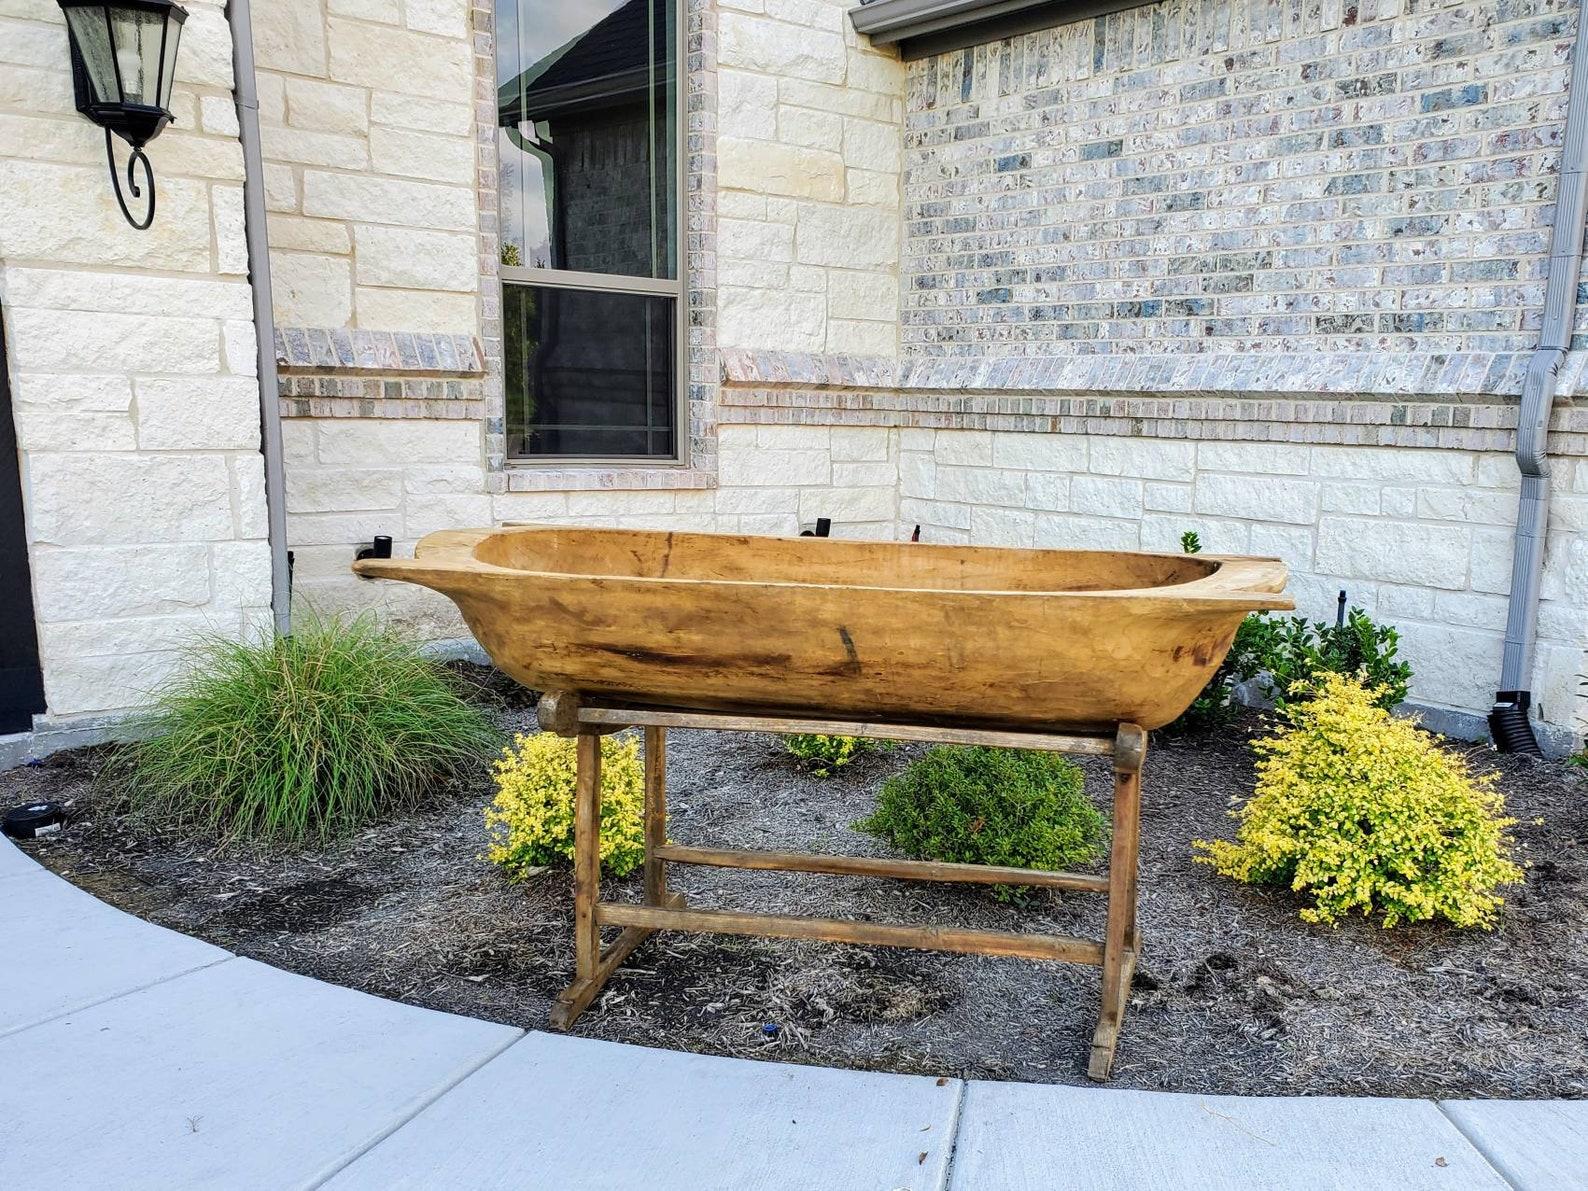 Used for multi-family communal and occasionally industrial baking, this huge fruitwood trough was hand-crafted from a single split log, its rich antique brown wood color and tones showing off the tool marks on its hand-hewn interior. A few marks,